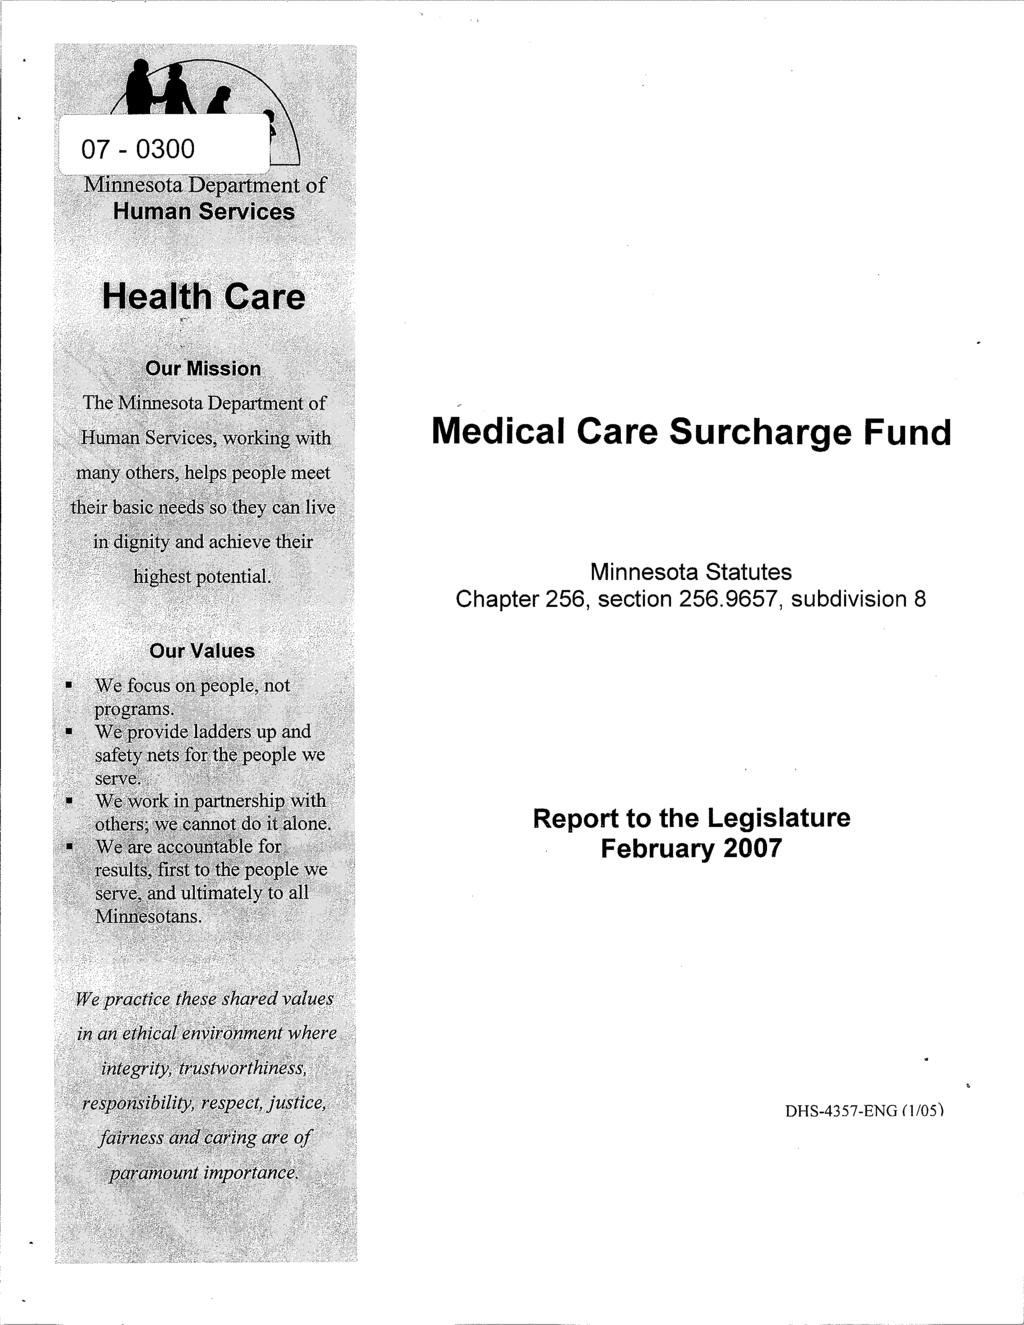 Medical Care Surcharge Fund Minnesota Statutes Chapter 256, section 256.